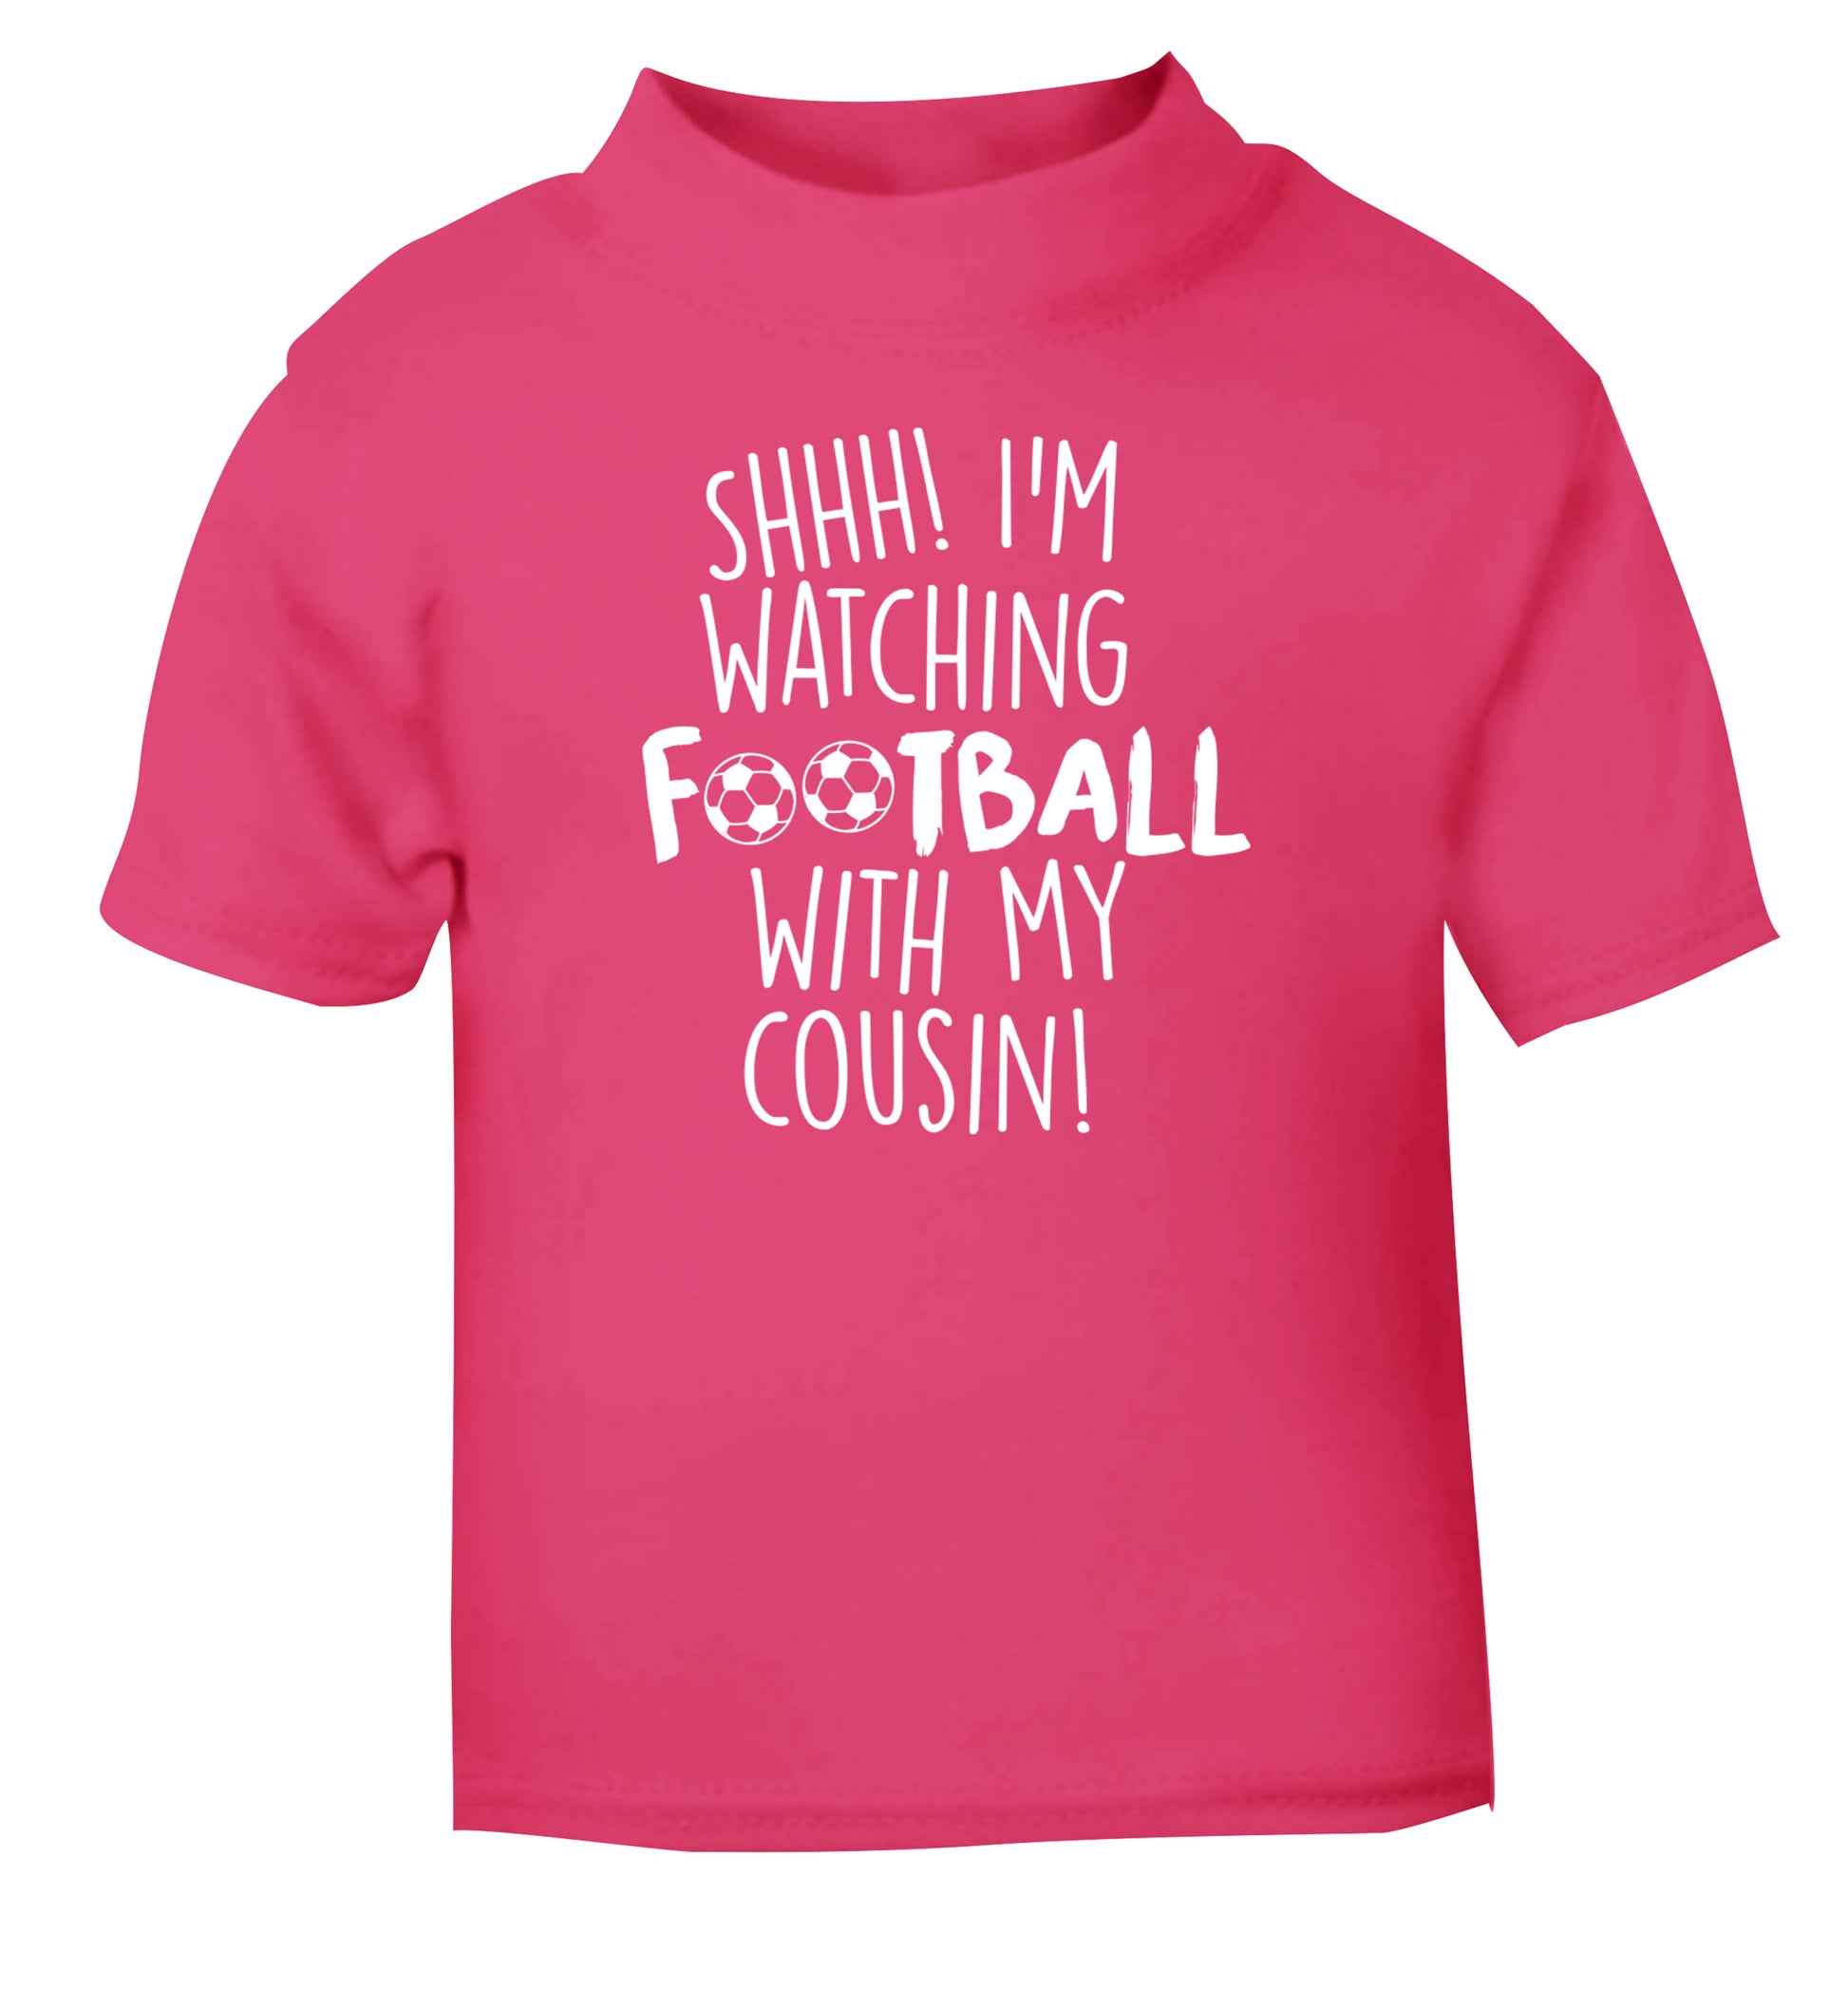 Shhh I'm watching football with my cousin pink Baby Toddler Tshirt 2 Years